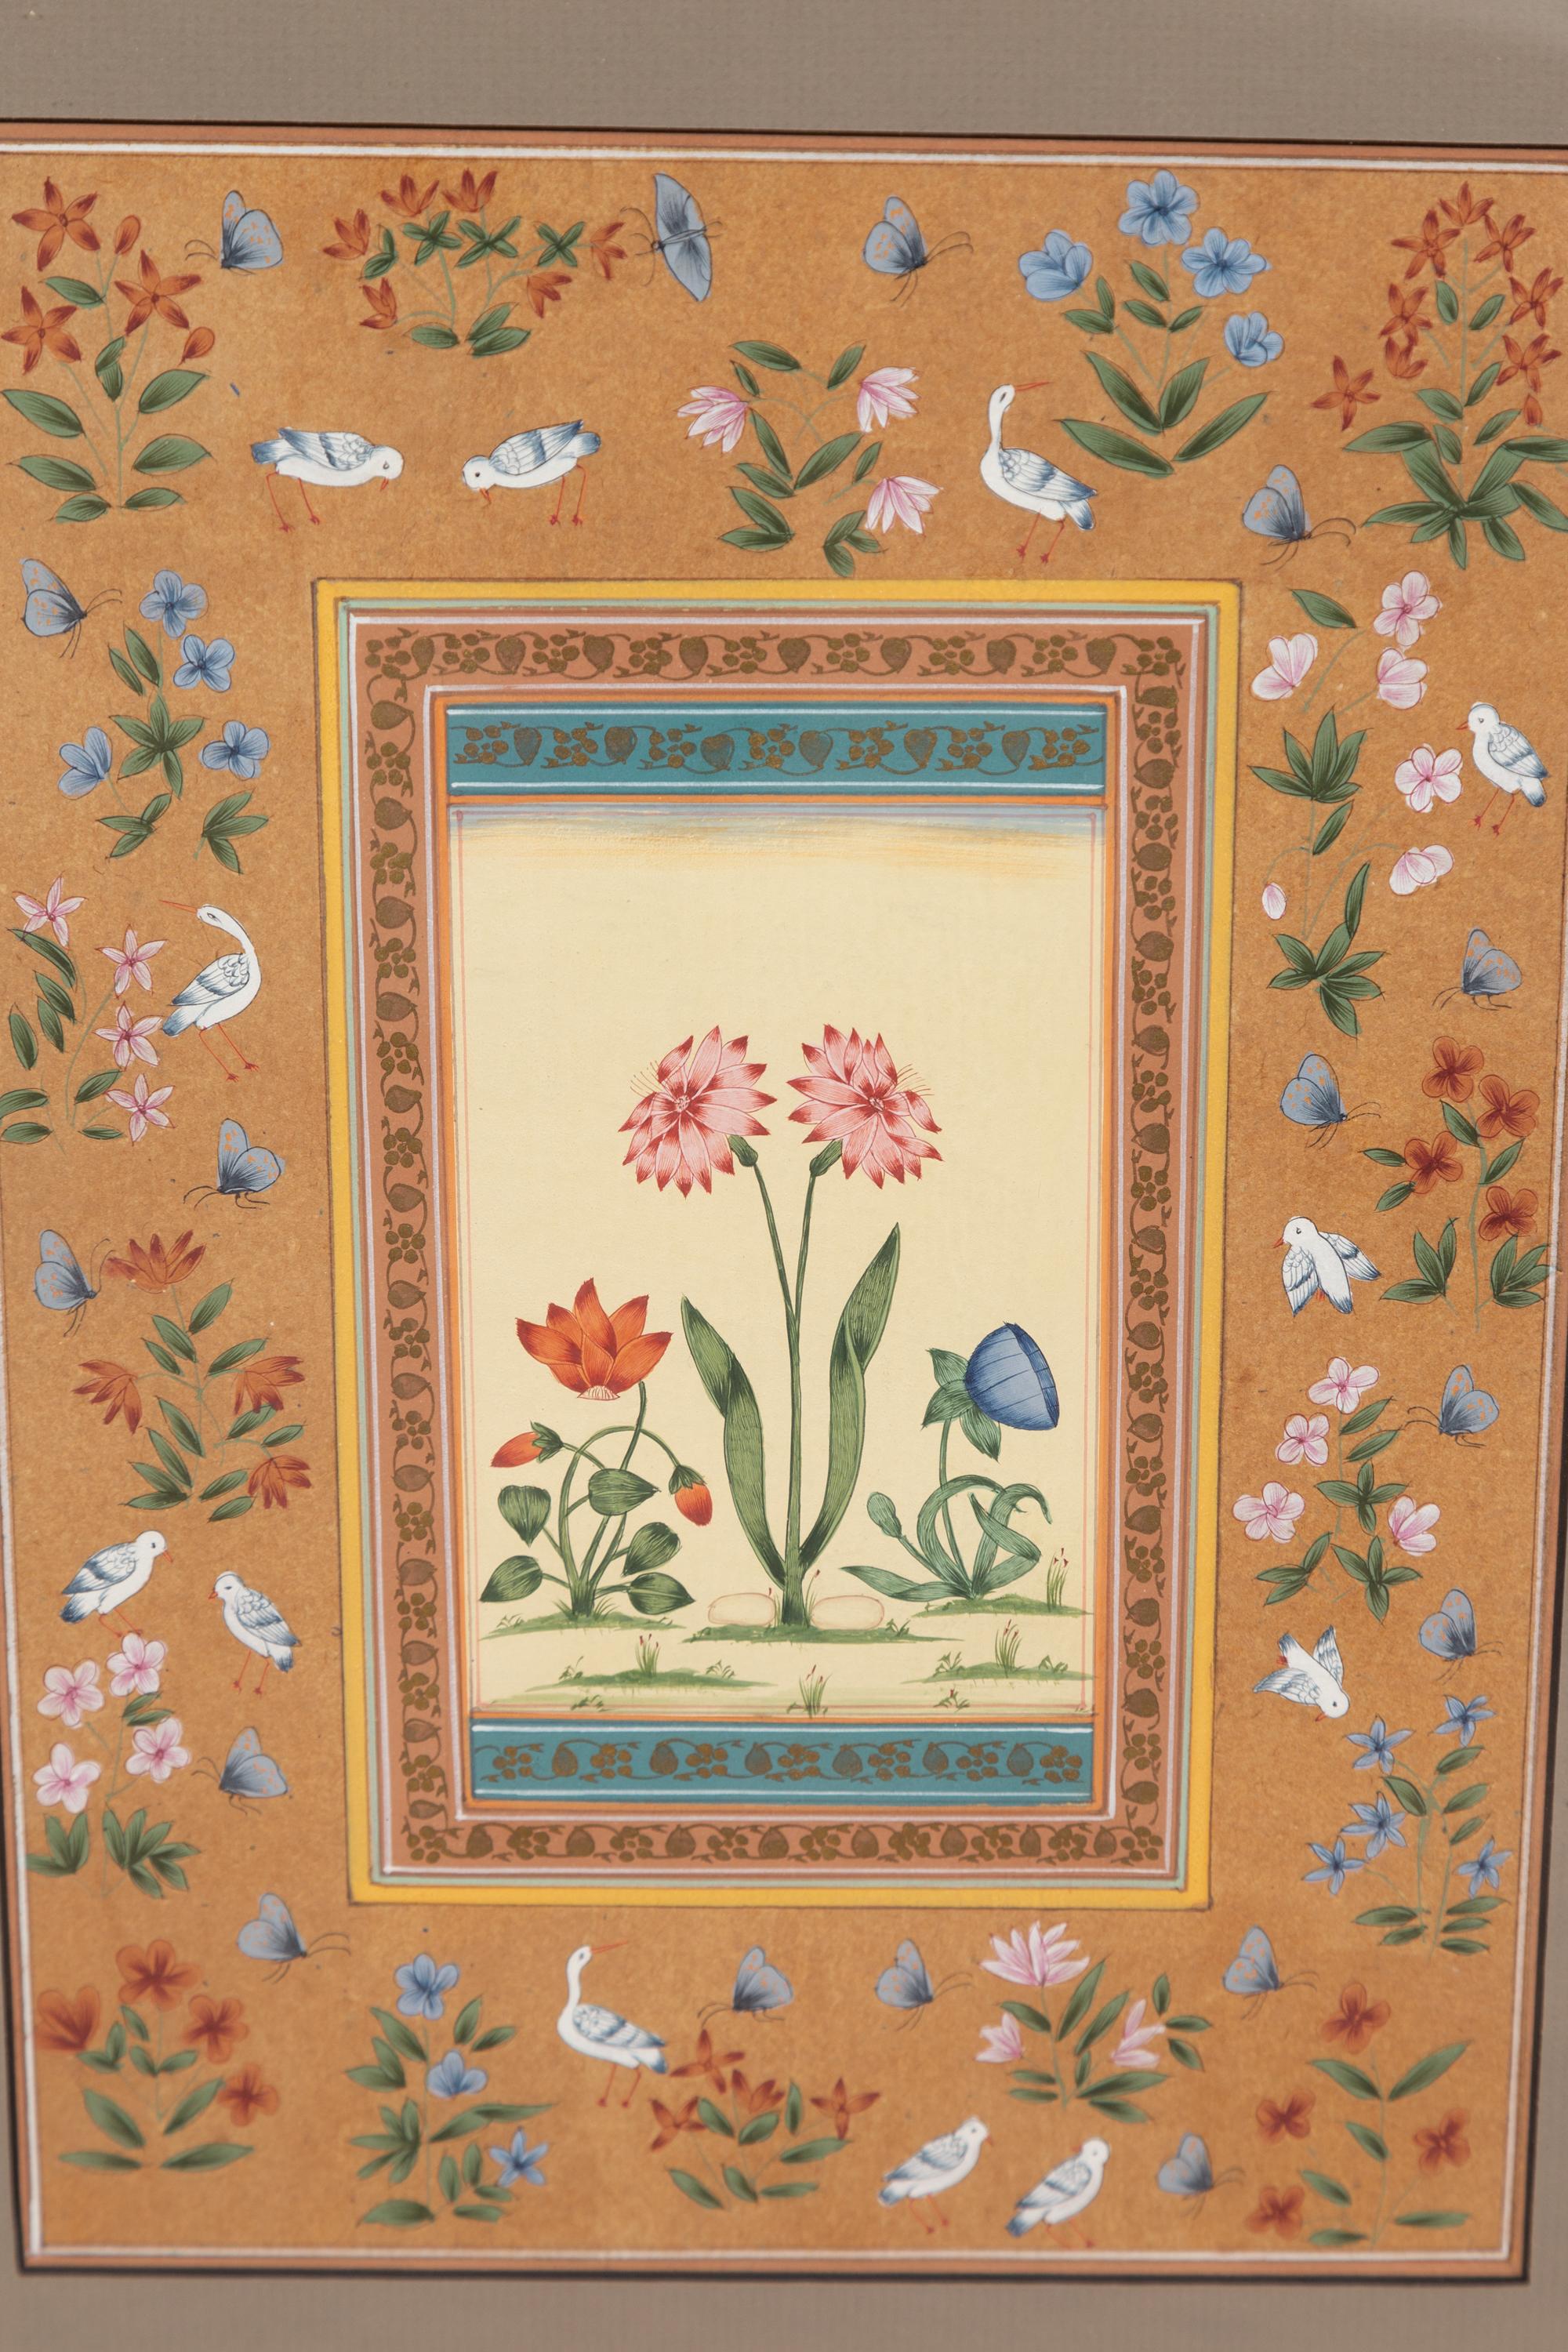 20th Century Indian Floral Still-Life from the Midcentury Period with Flowers and Birds